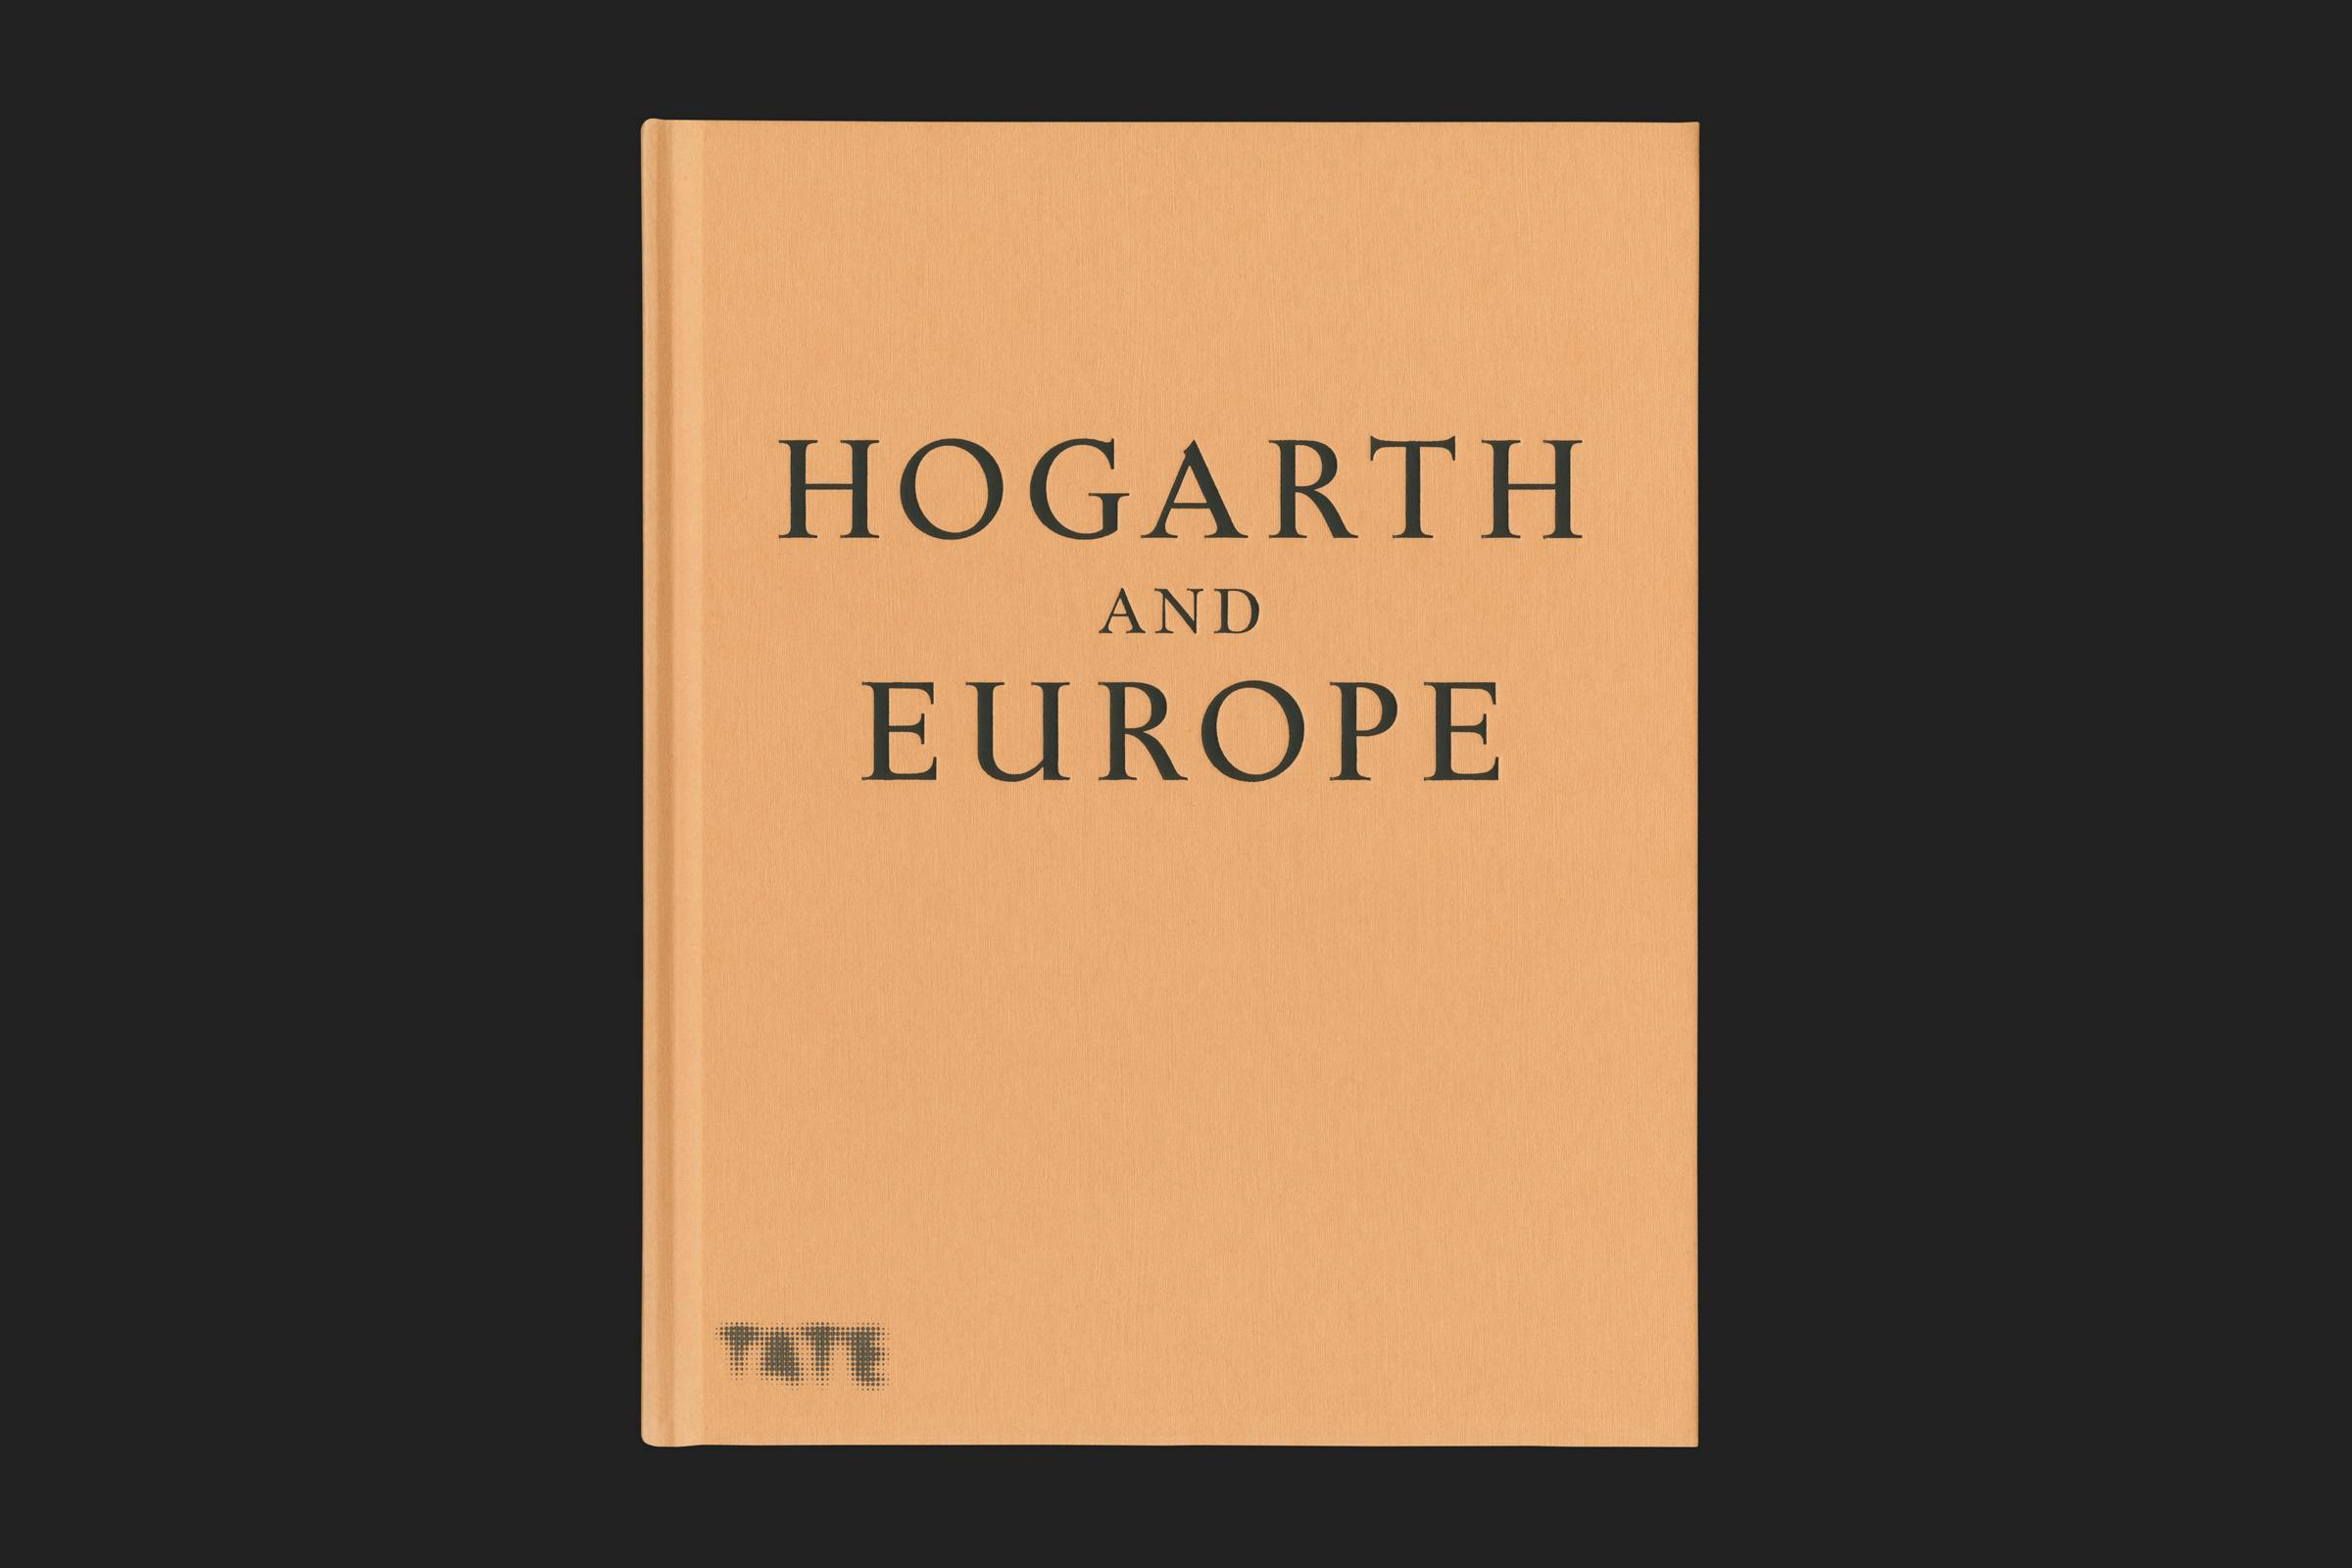 Tate Publishing, William Hogarth, Tate Britain, Hogarth and Europe, Graphic Design by Wolfe Hall